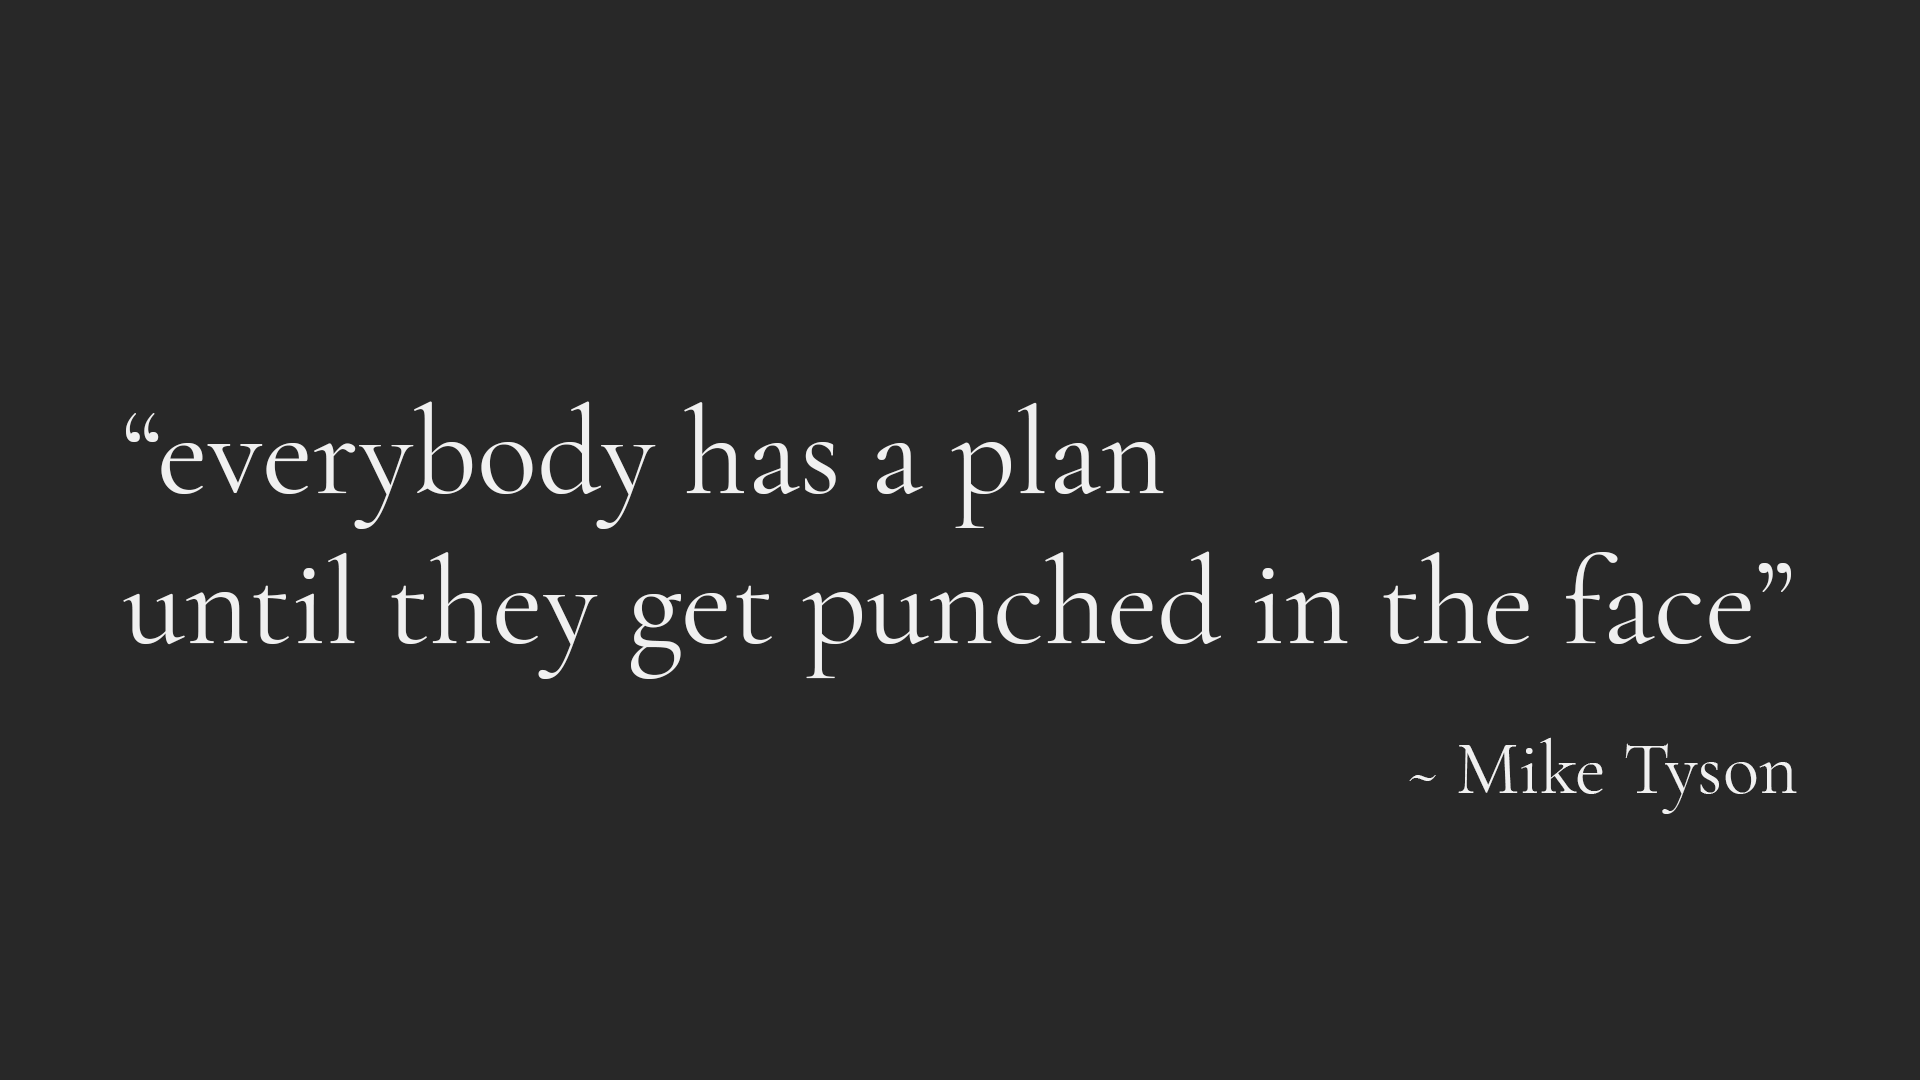 "Everybody has a plan until they get punched in the face." - Mike Tyson